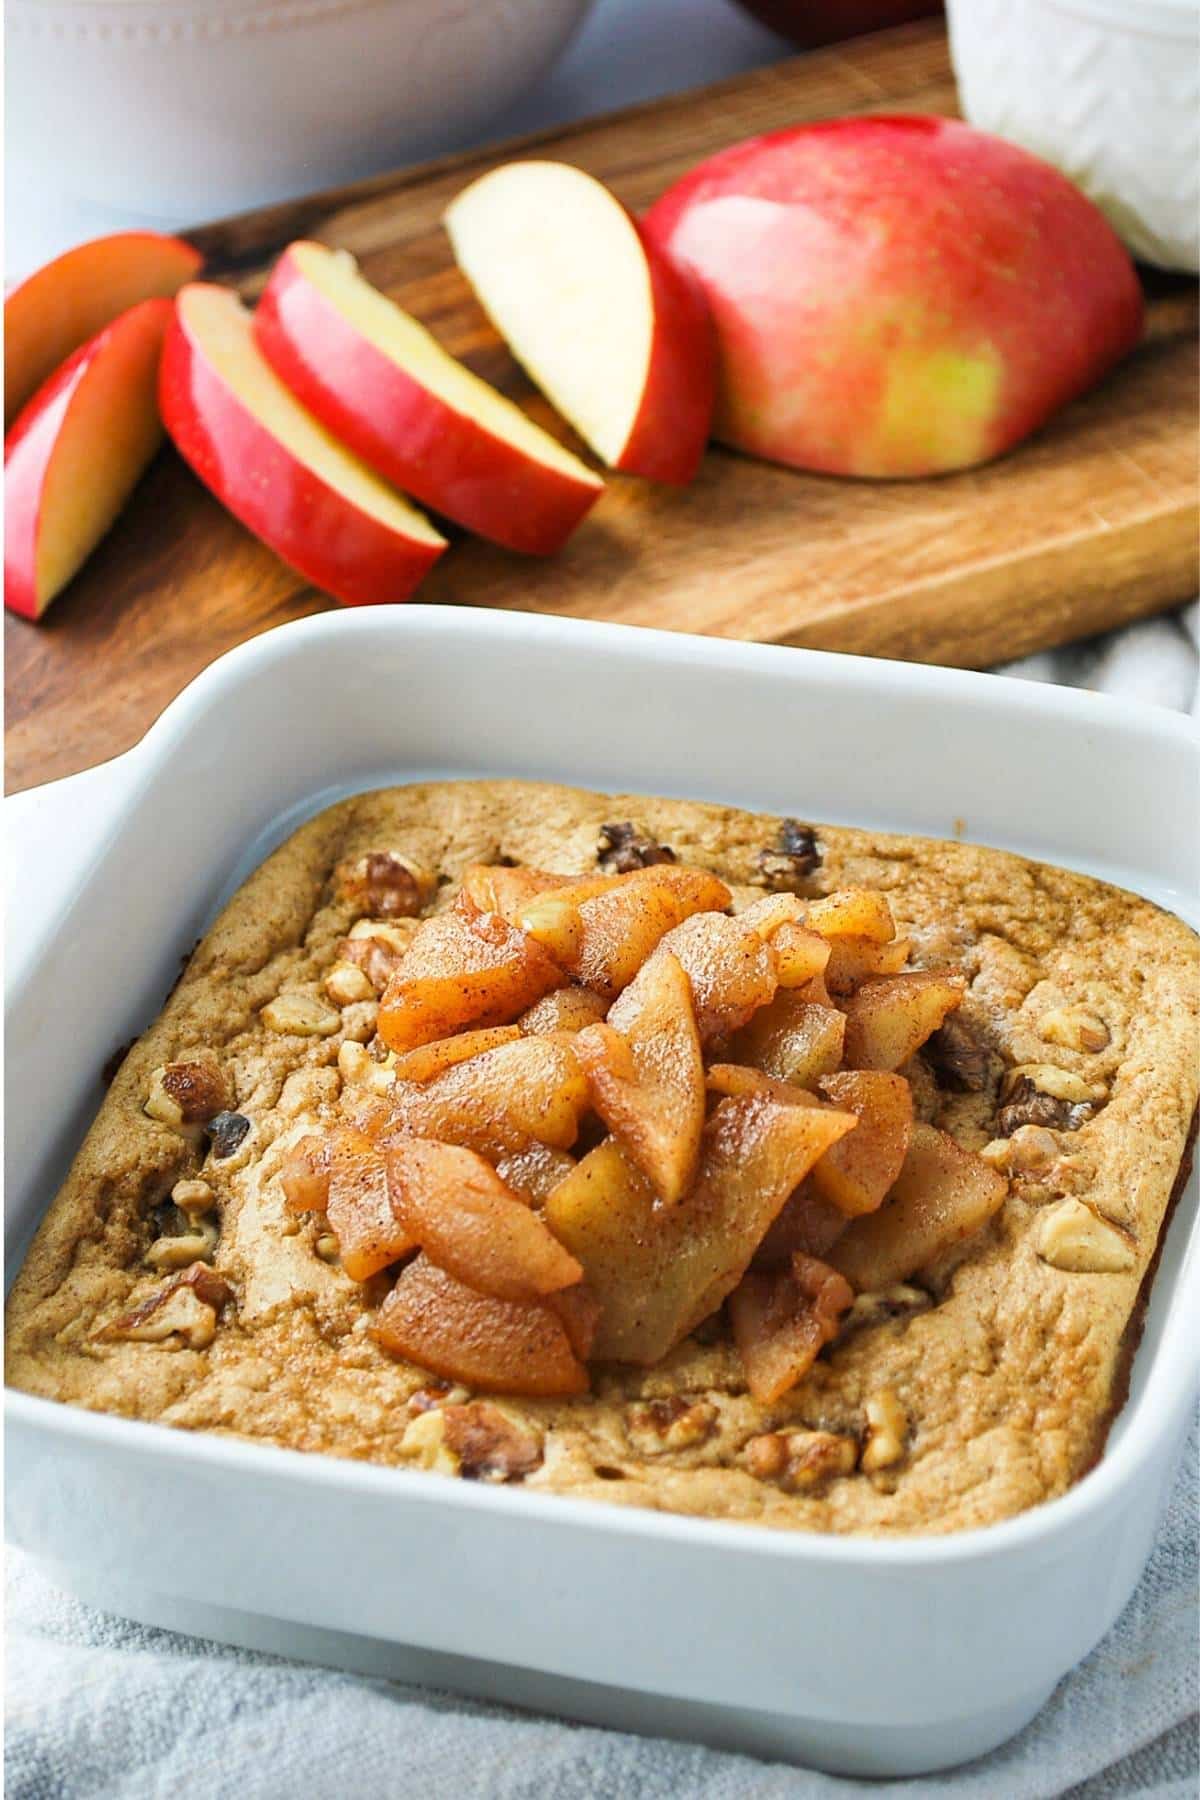 a pan of baked apple oats with cinnamon apples and walnuts